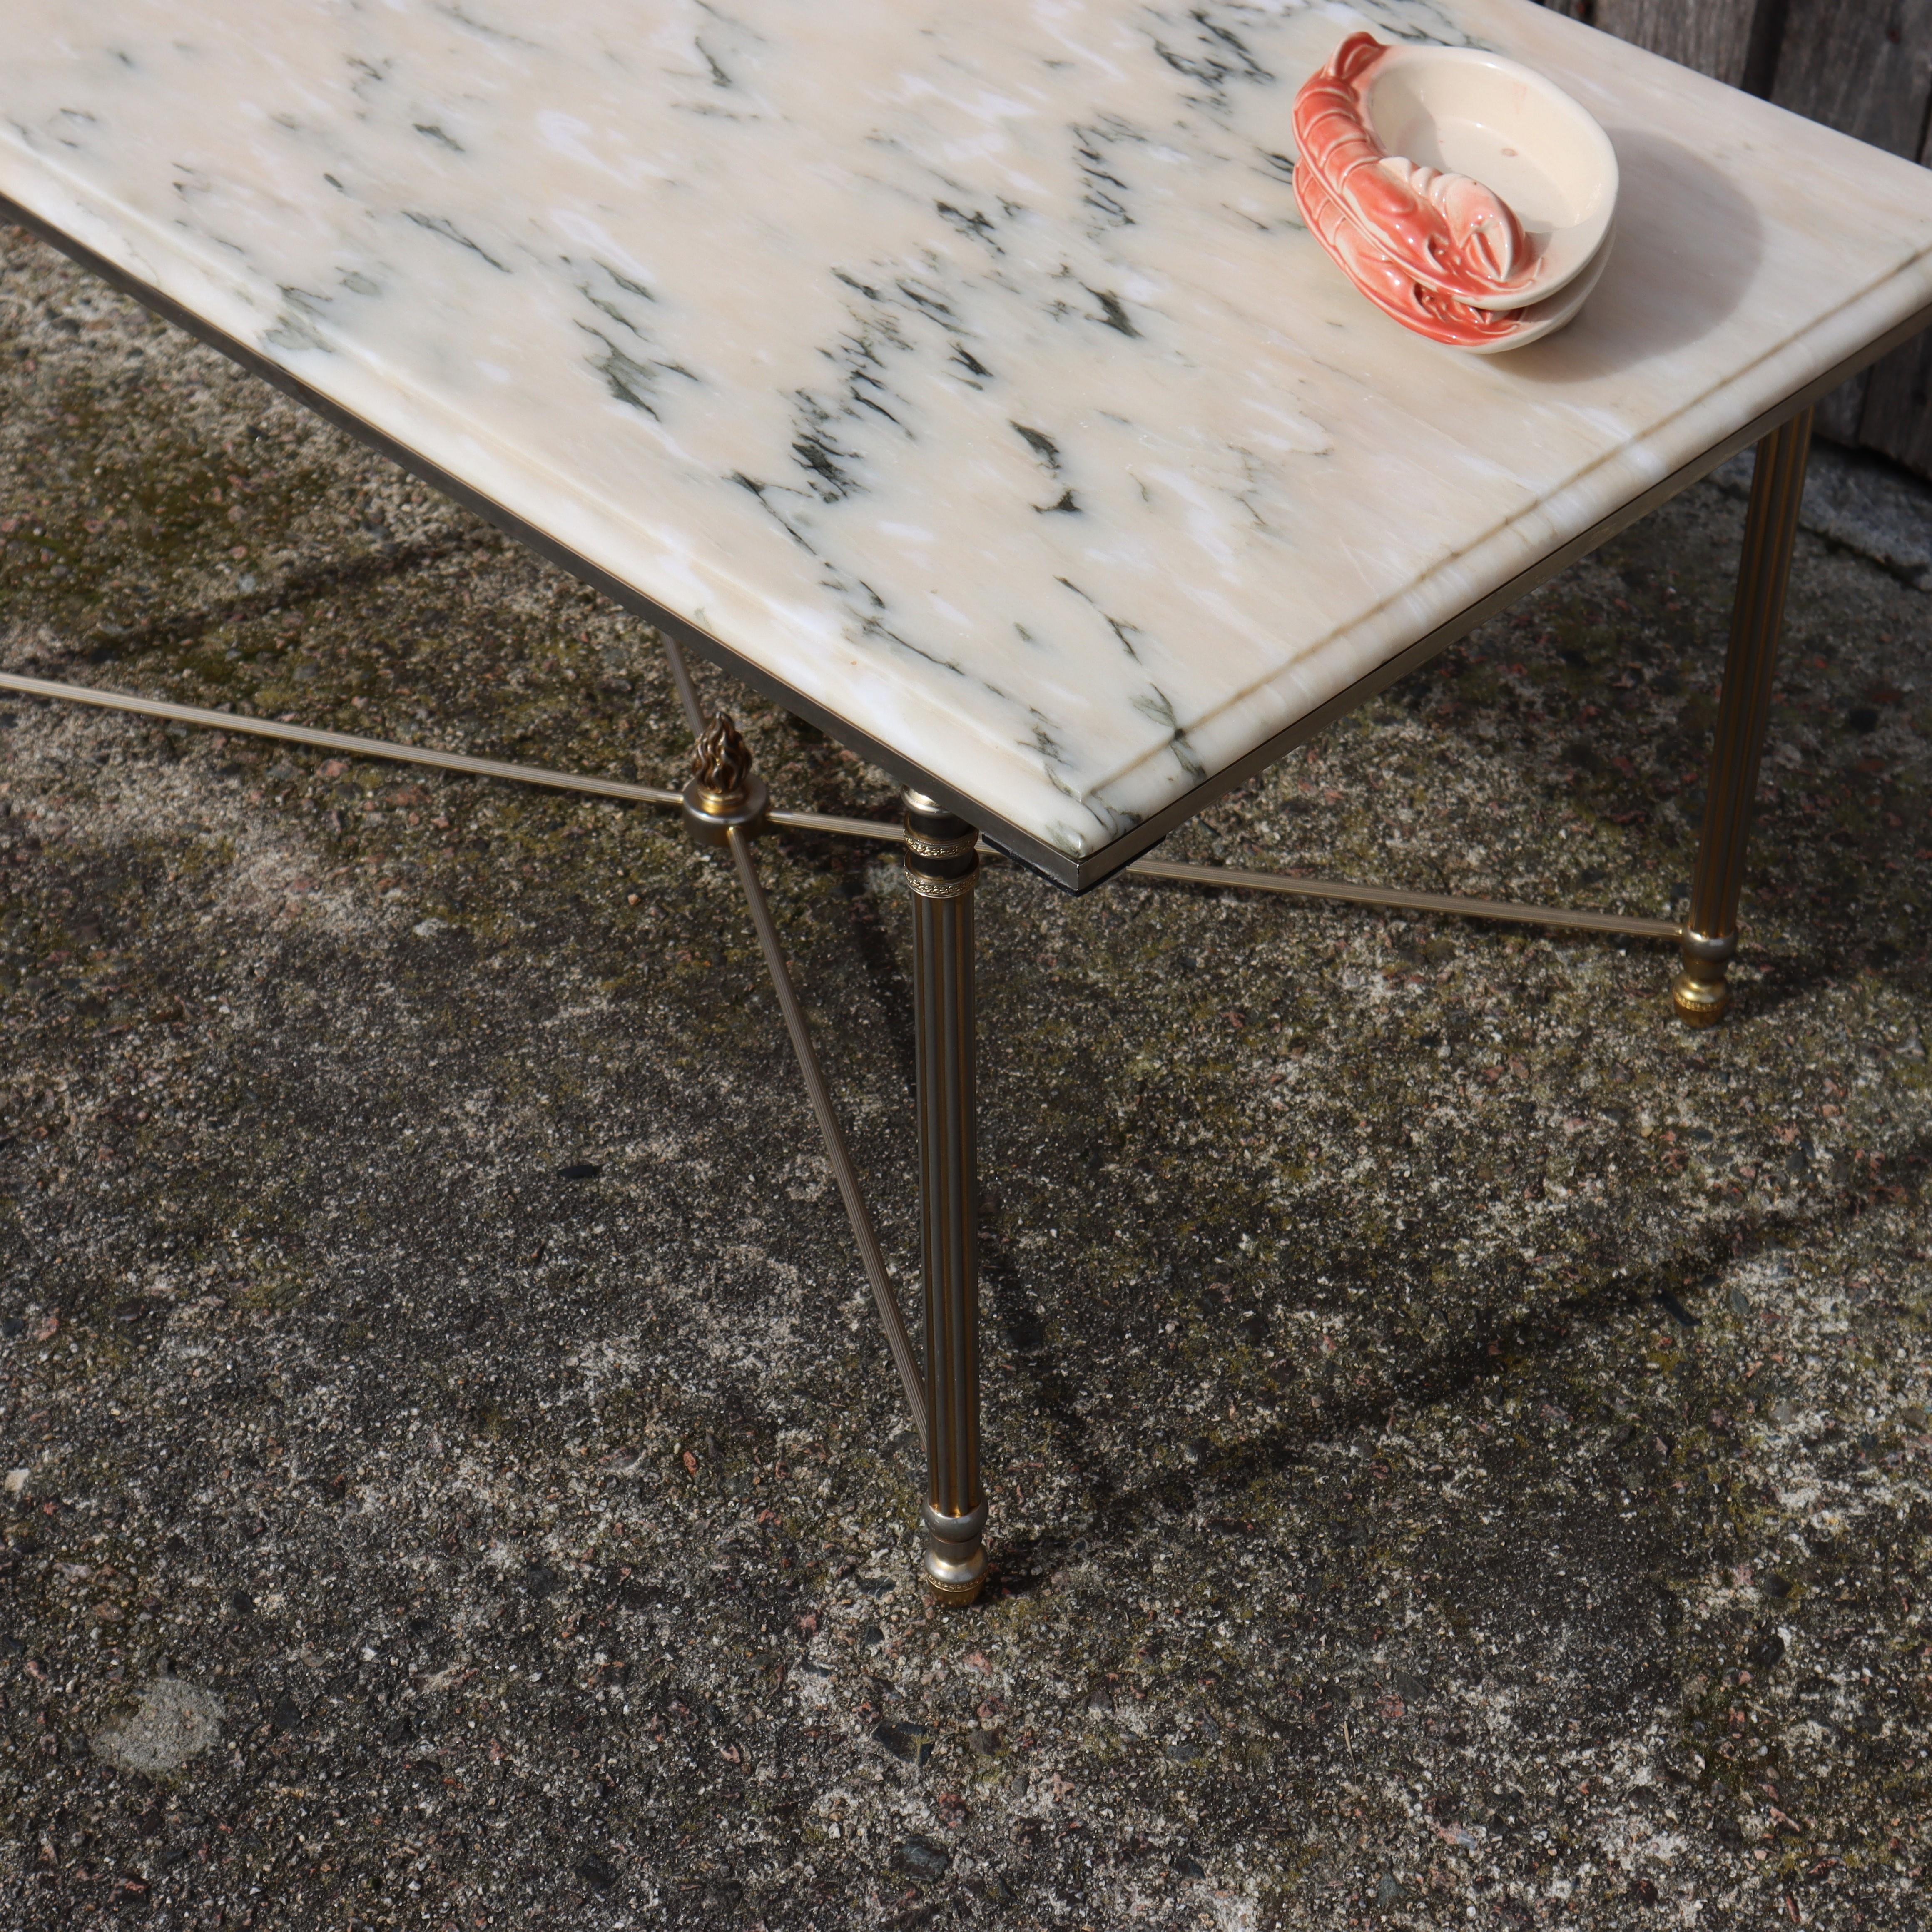 Anodized French Vintage Marble and Brass Coffee Table - Lounge Table-Regency Style -70s